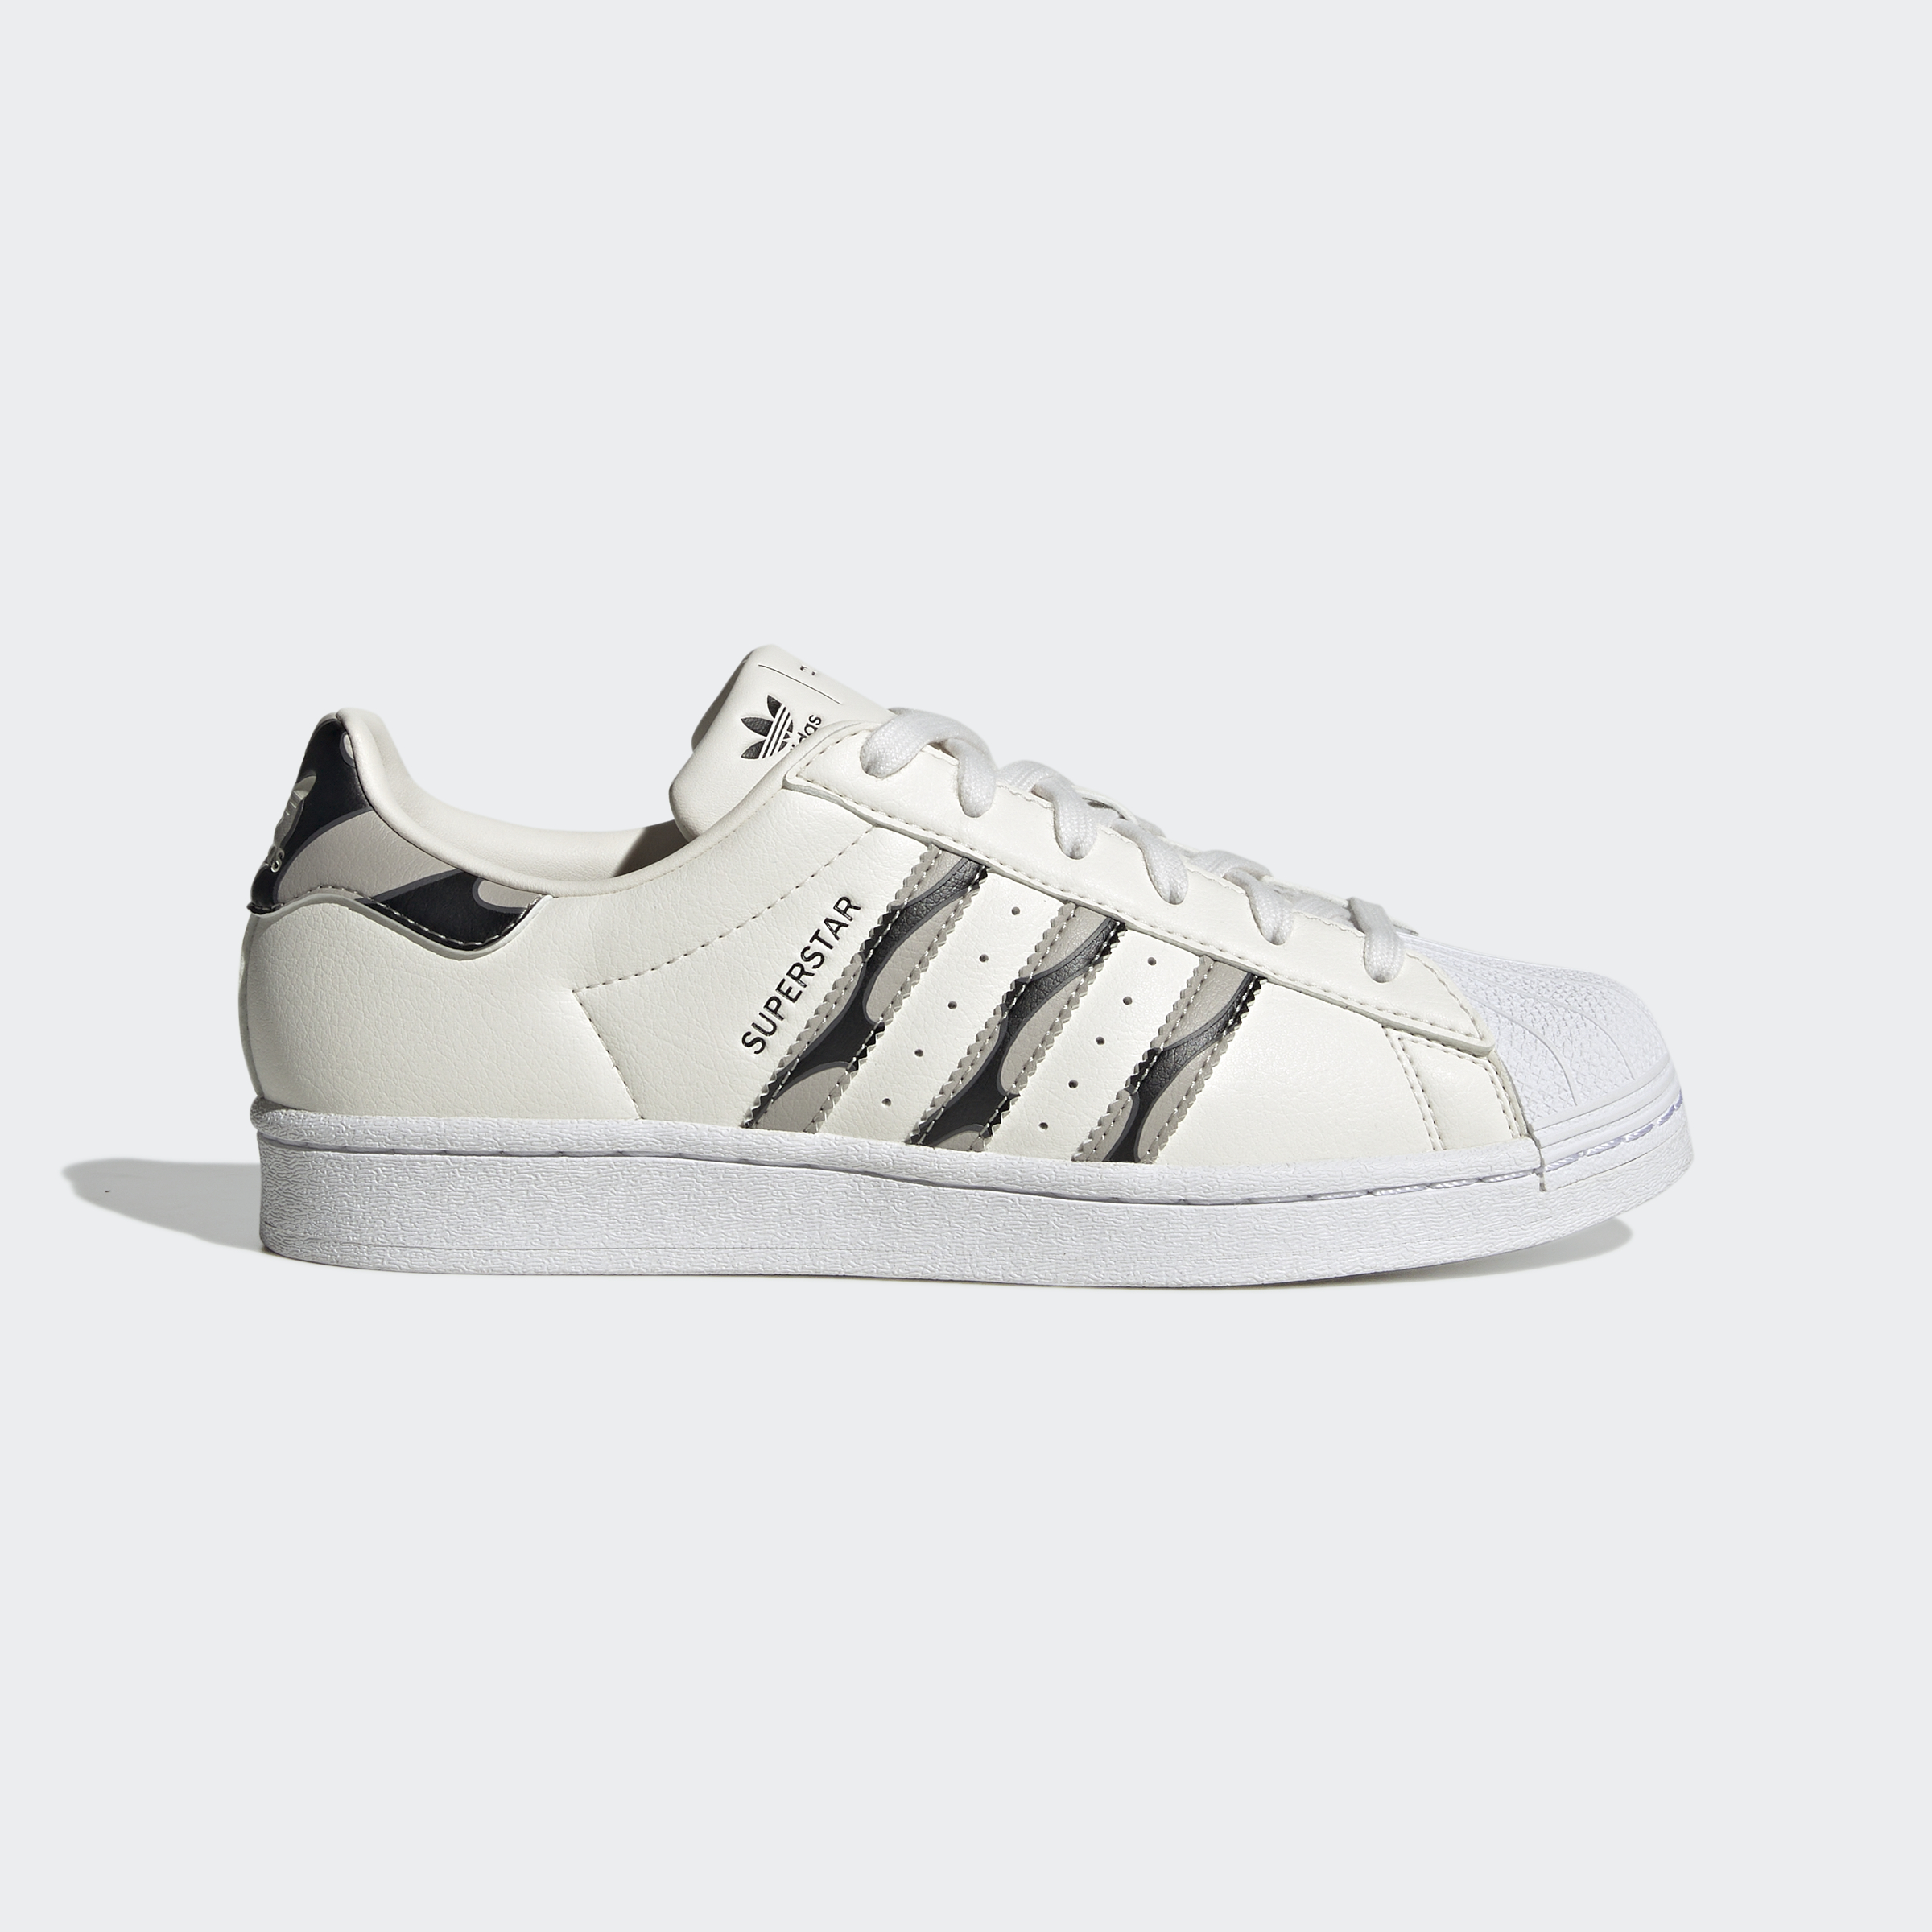 adidas, Shoes, Classic Adidas Shell Toe Superstar Size 52 Sneakers Shoes  White Black Gold Ty